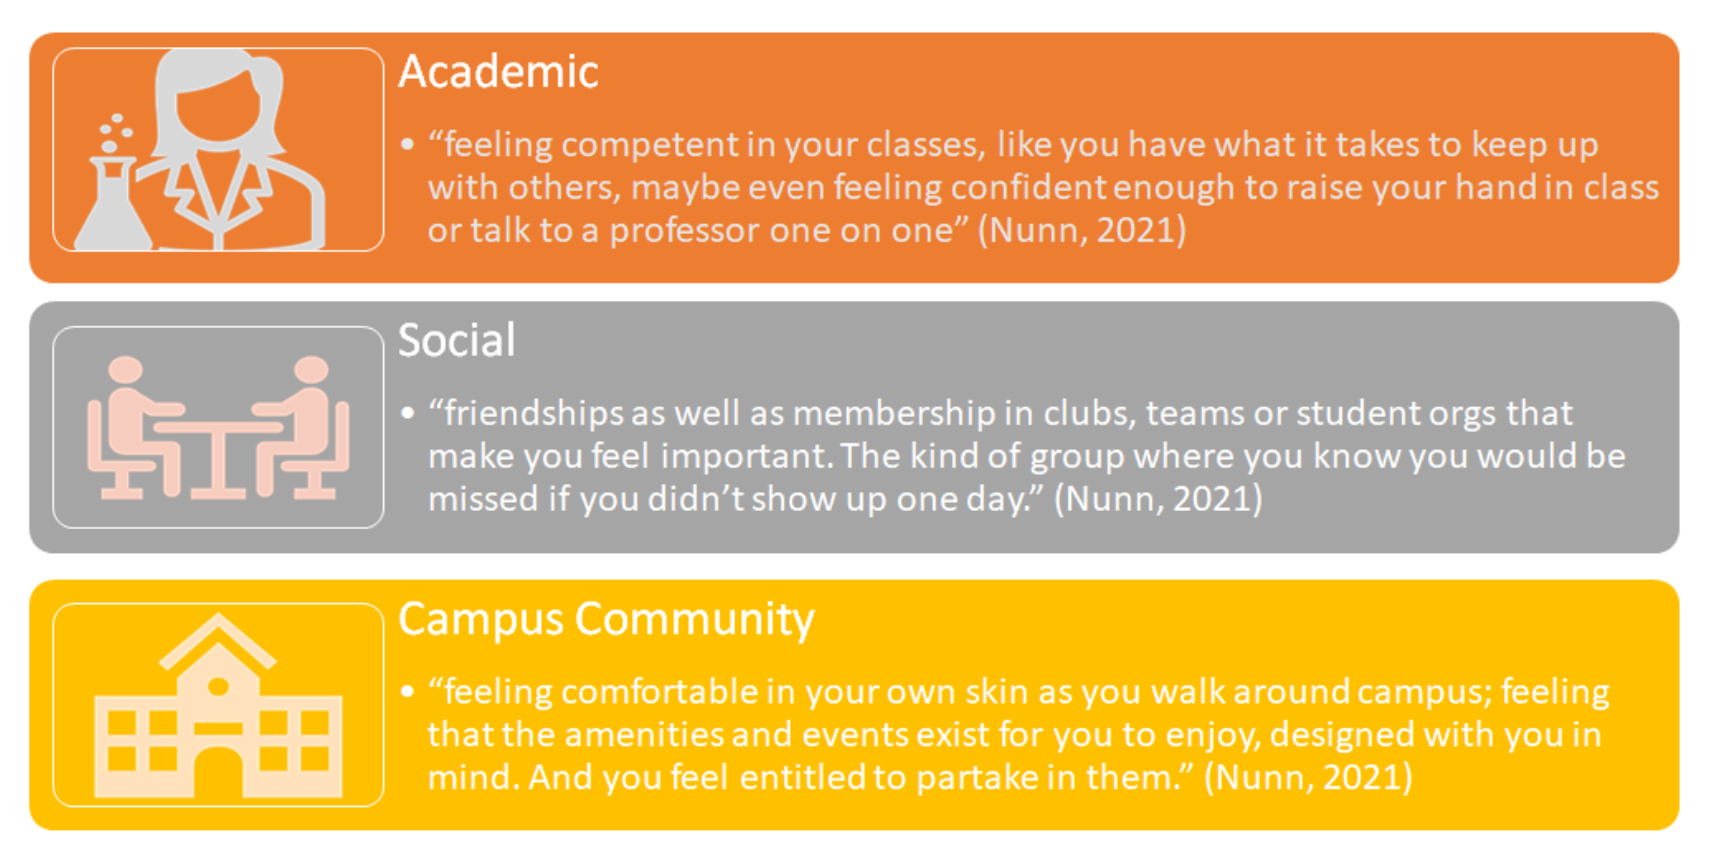 Divided in three sections: Definitions of each section by Nunn 2021: Academic: Feeling competent in your classes, like you have what it takes to keep up with others, maybe even feeling confident enough to raise your hand in class or talk to a professor one by one / Social: friendships as well as memberships in clubs, teams or student orgs that make you feel important. The kind of group where you know you would be missed if you didn't show up one day. Campus Community: feeling comfortable in your own skin.